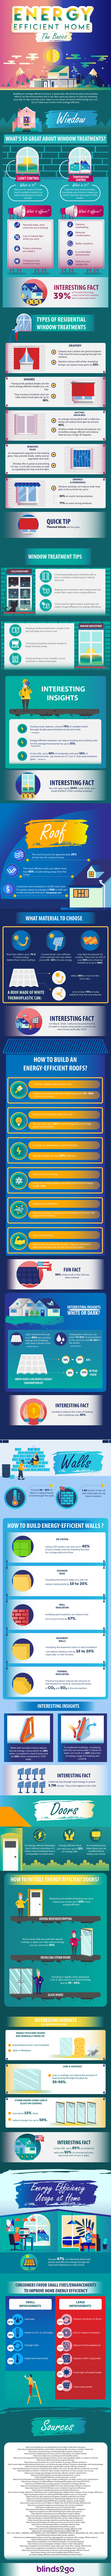 environmental-aspects-energy-efficient-home-infographic